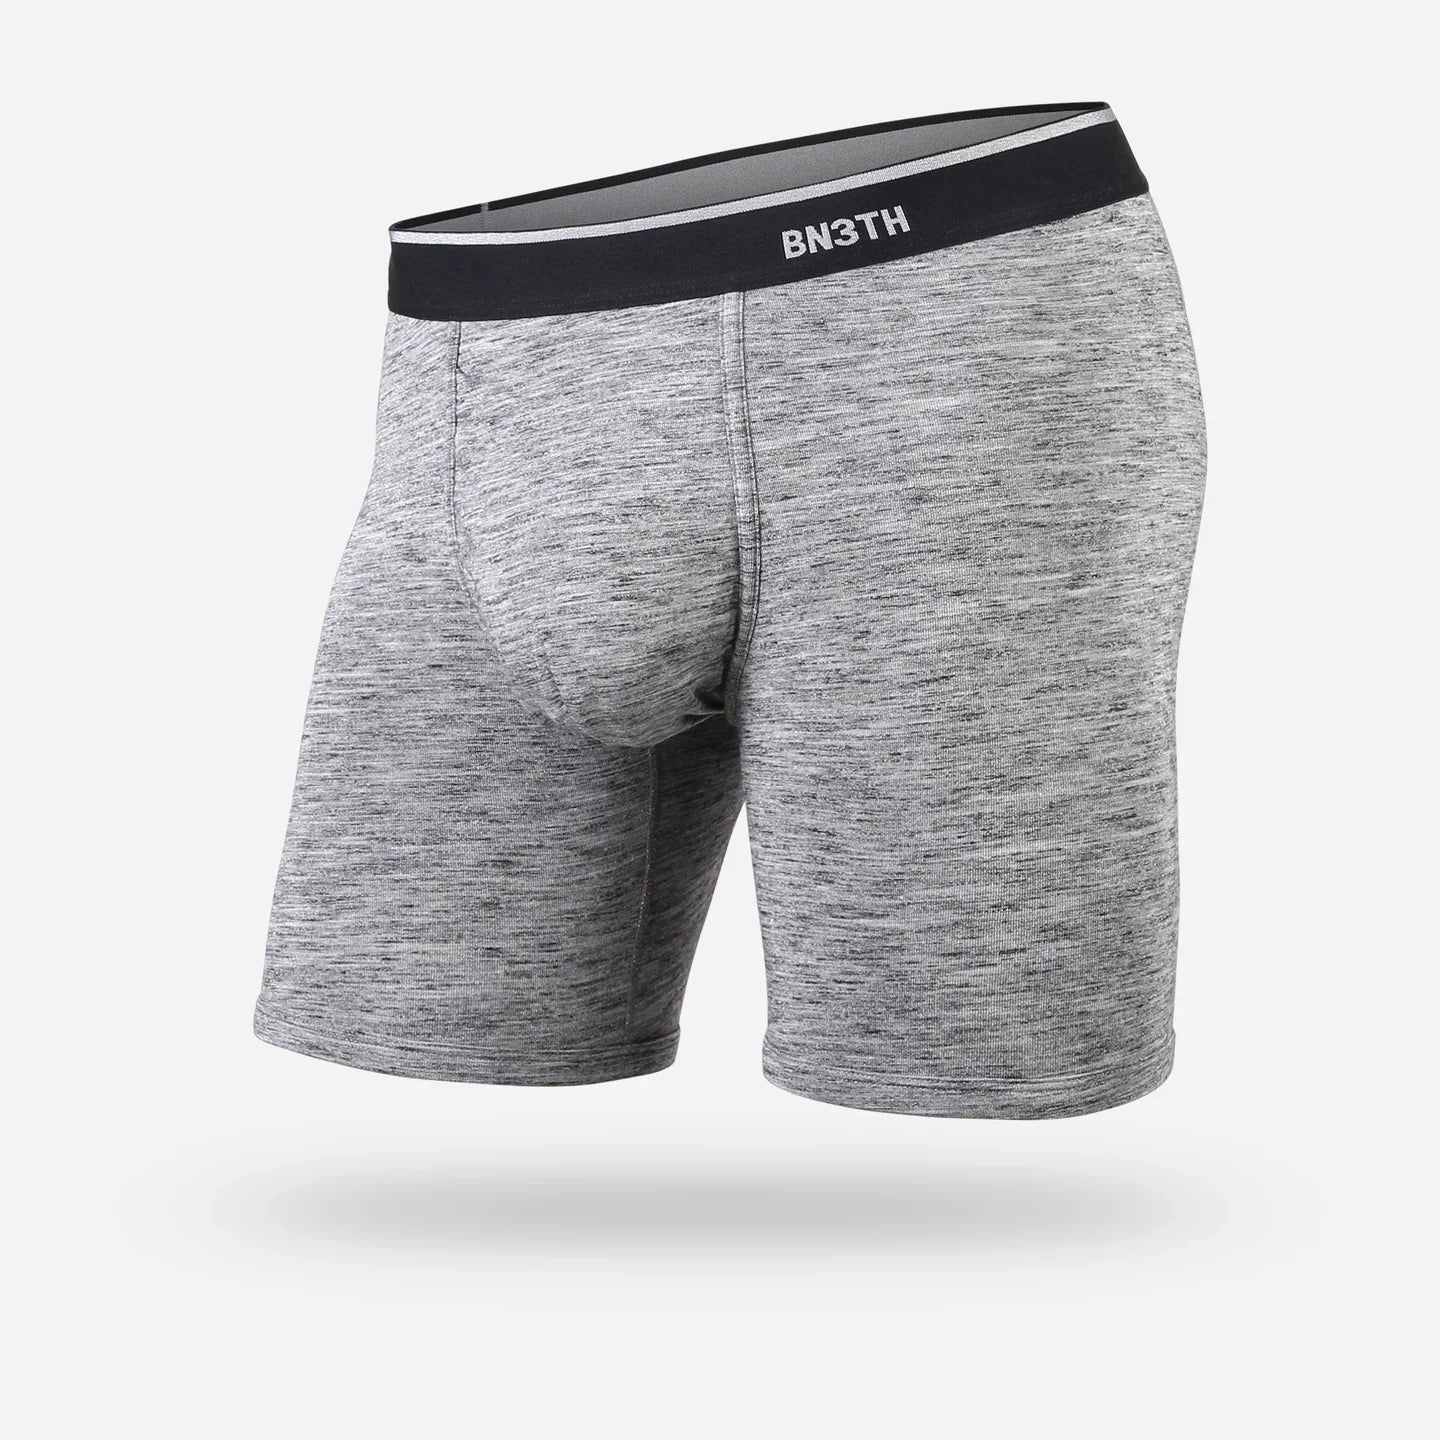 Classic Boxer Brief in Heather Charcoal